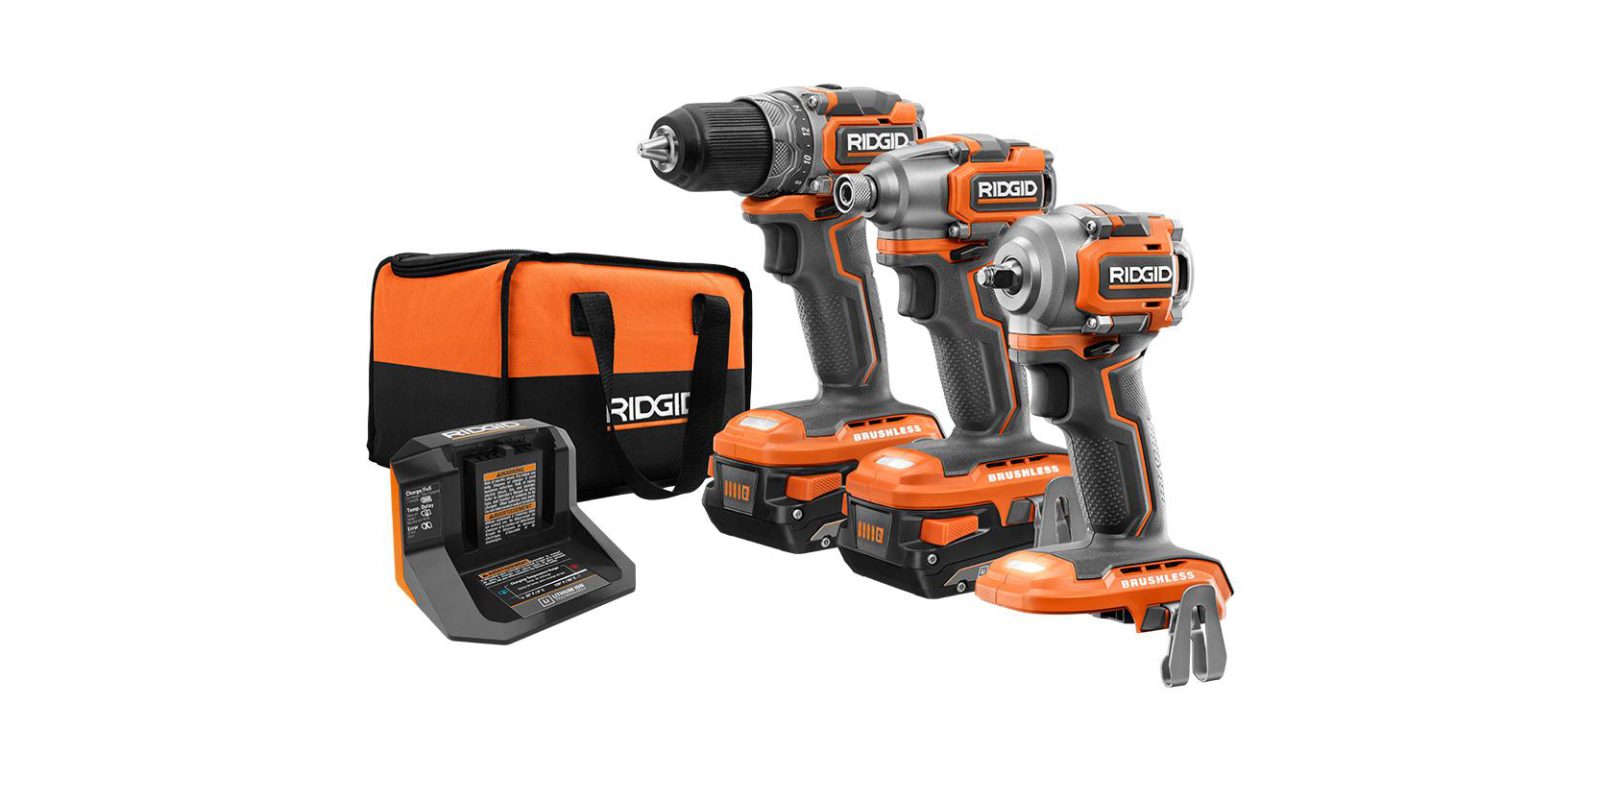 Home Depot launches new RIDGID tool sale from 79 this week 9to5Toys